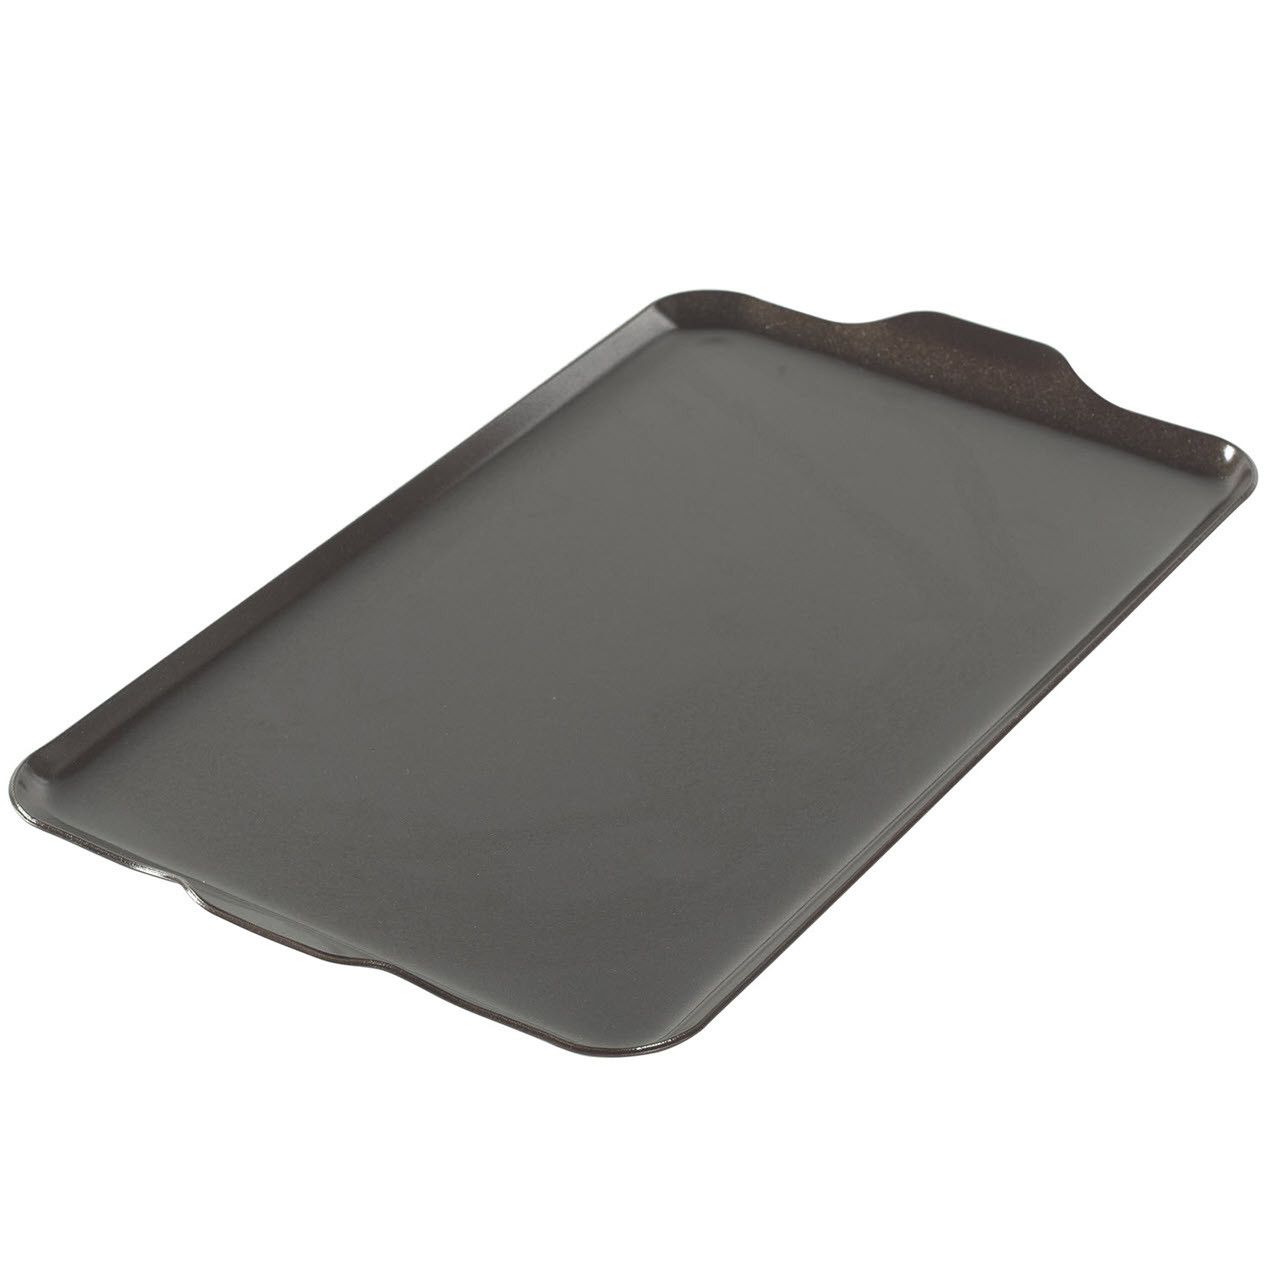 Nordic Ware Square Griddle King 10215M